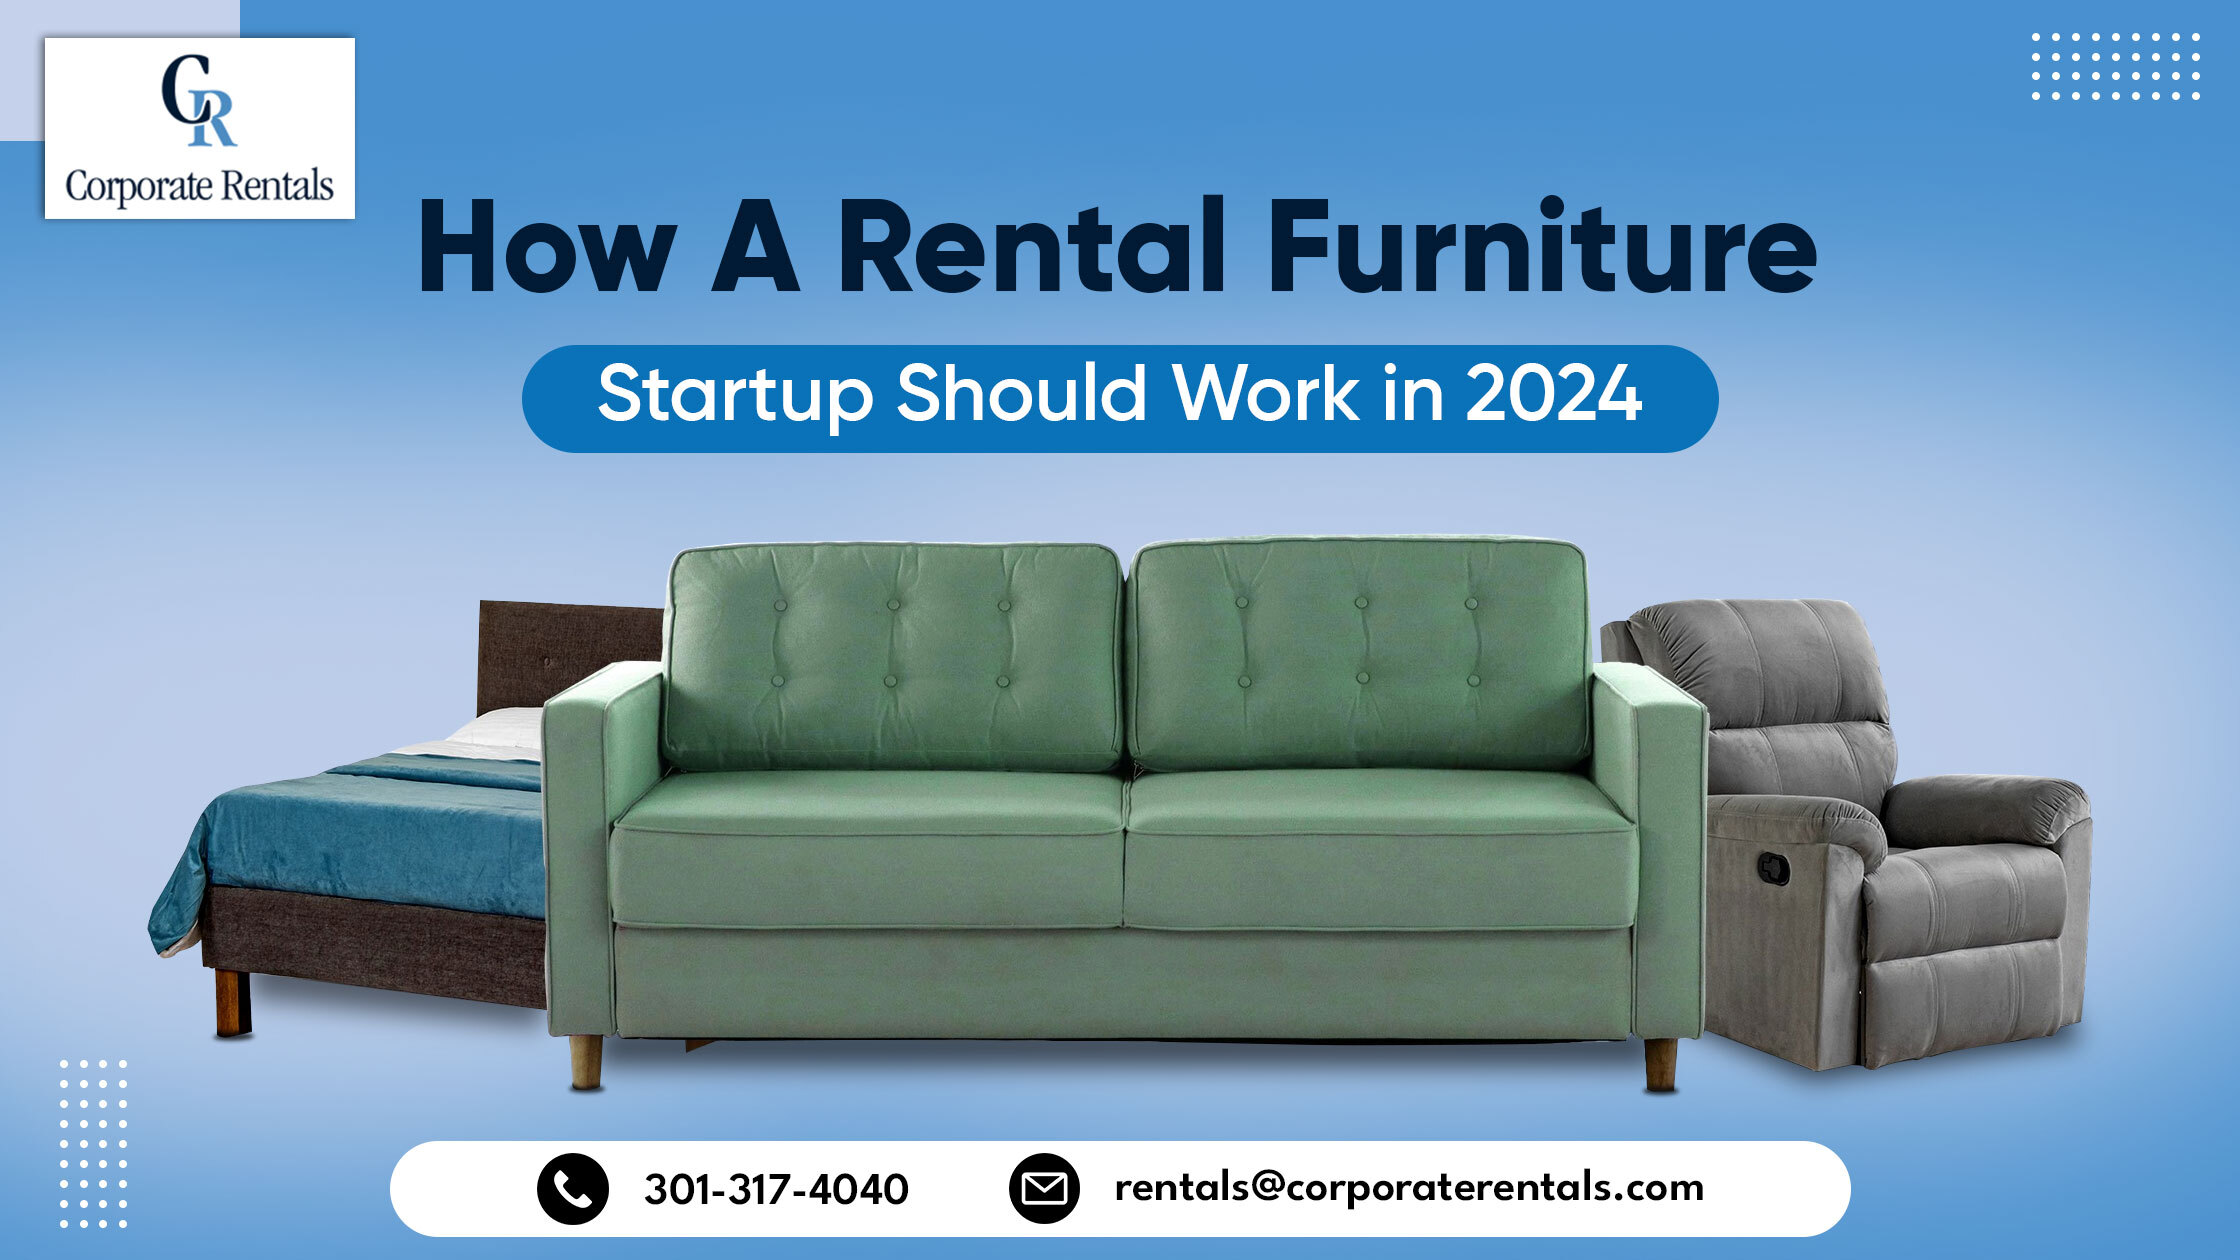 How A Rental Furniture Startup Should Work in 2024